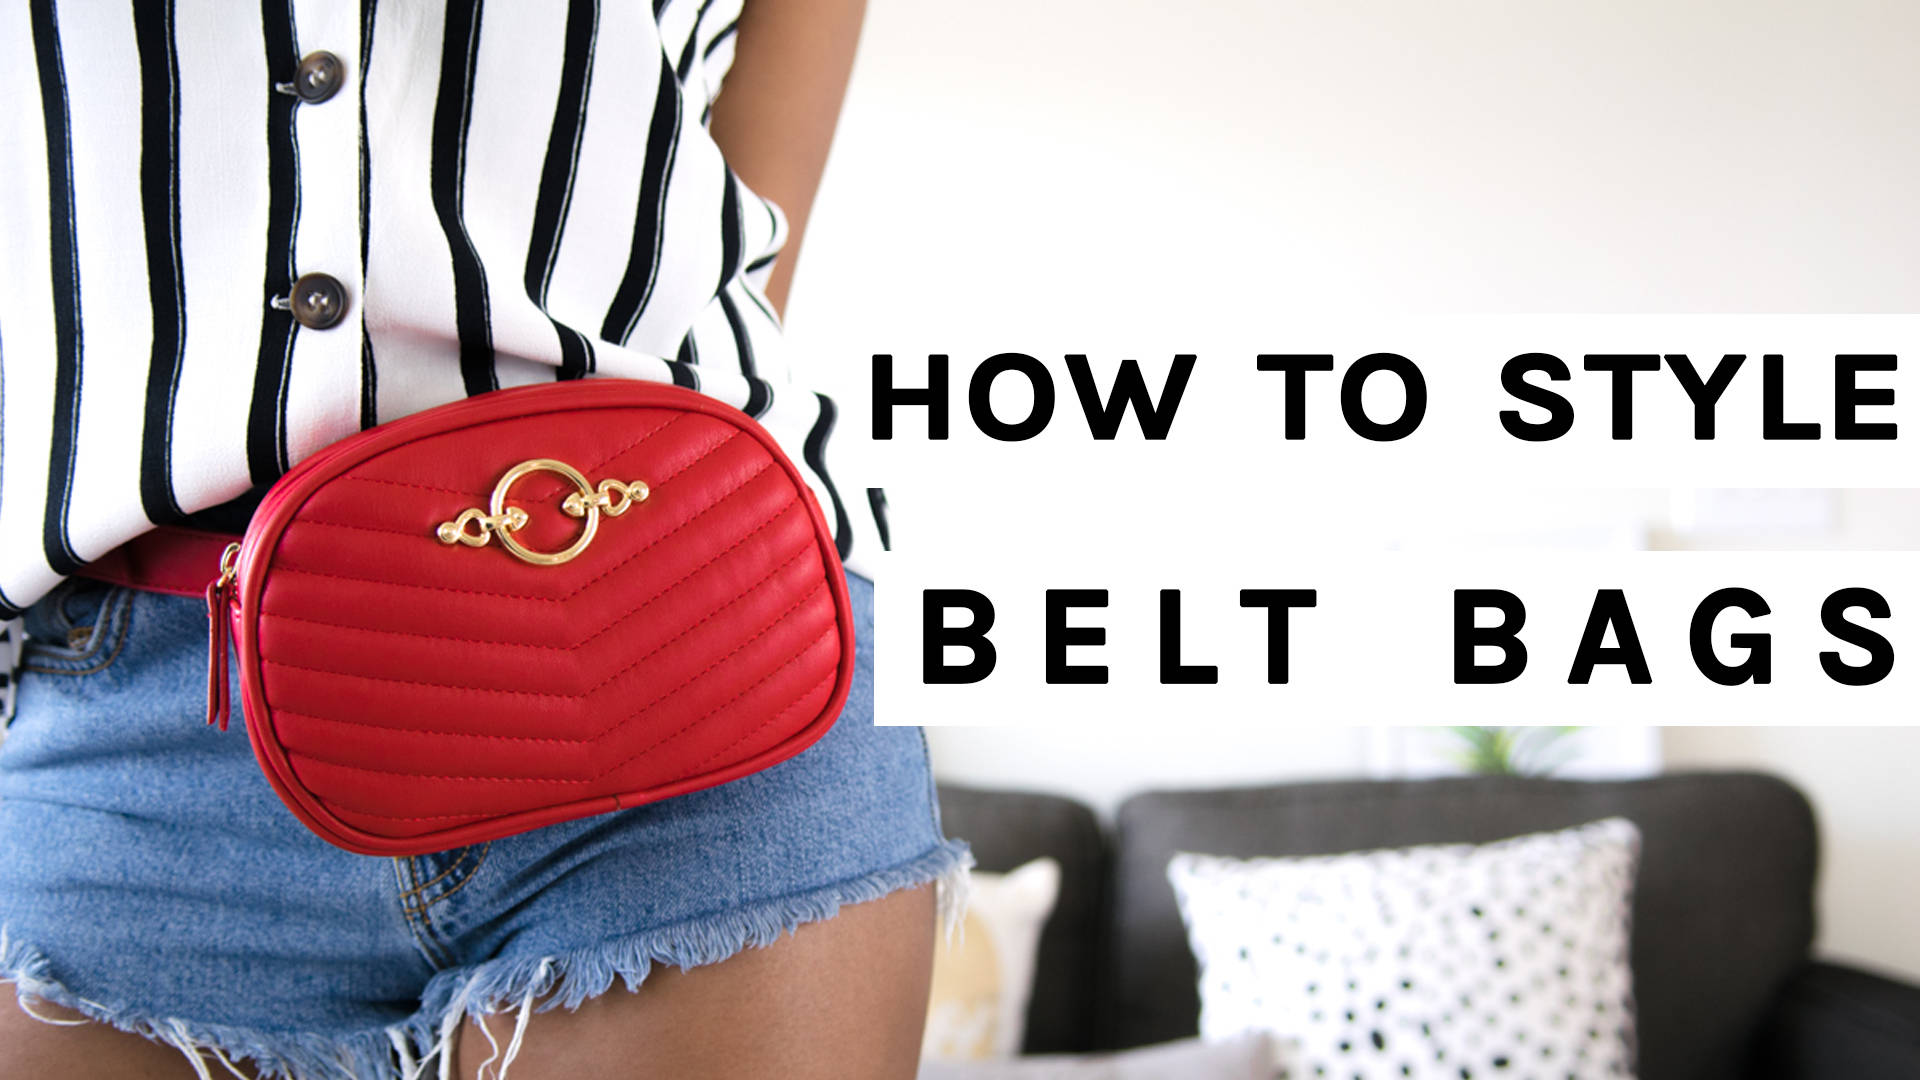 How to wear Belt Bags - Outfit Ideas by EasilyDressed